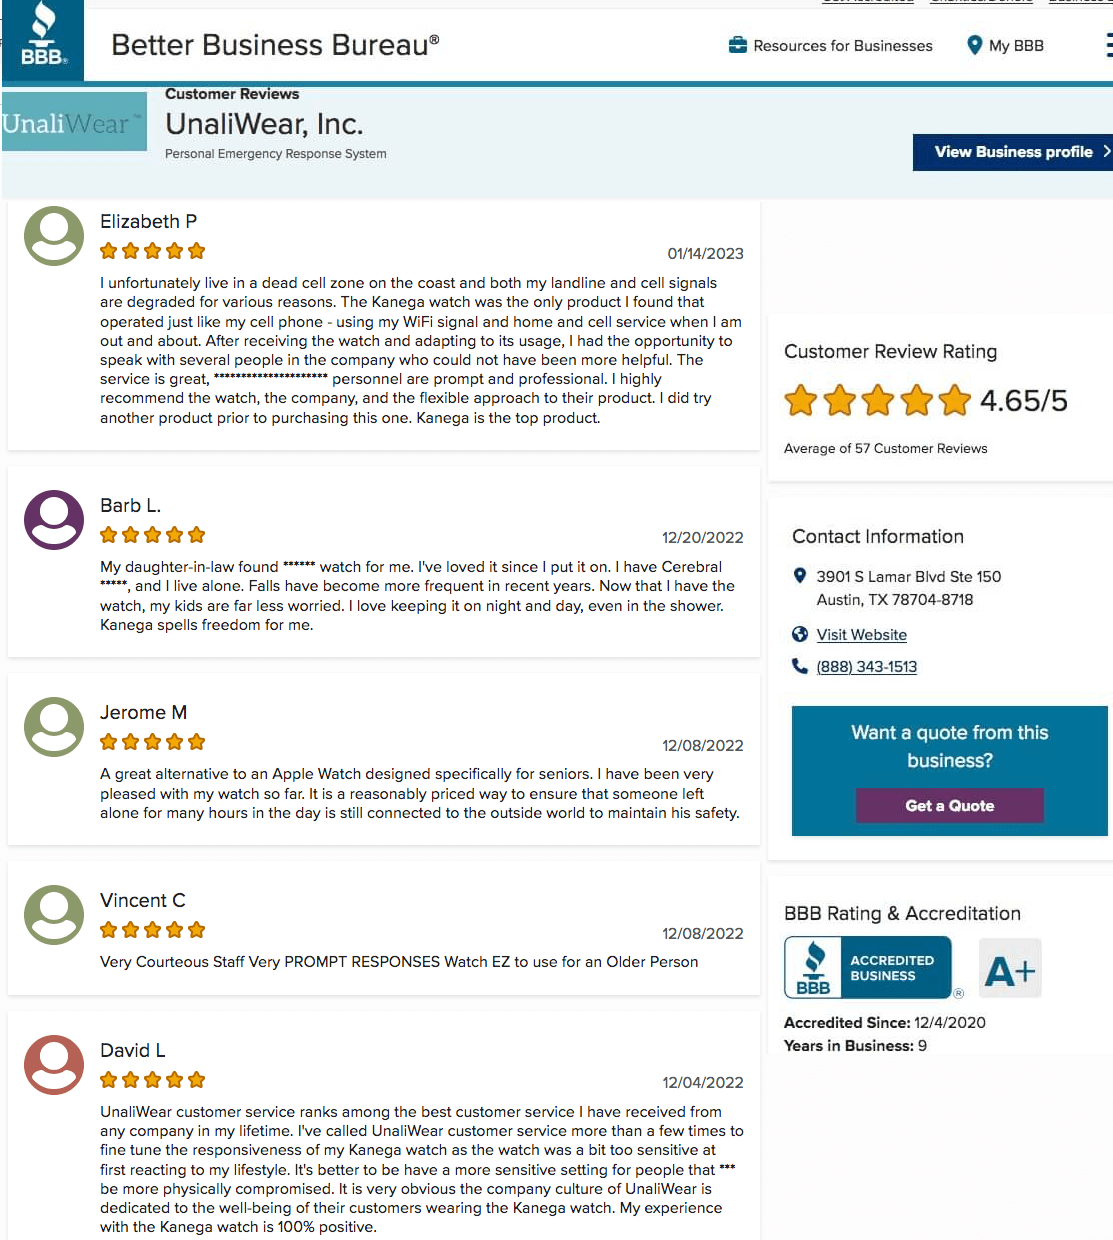 UnaliWear BBB Customer Reviews, complaints, rating and accreditation.